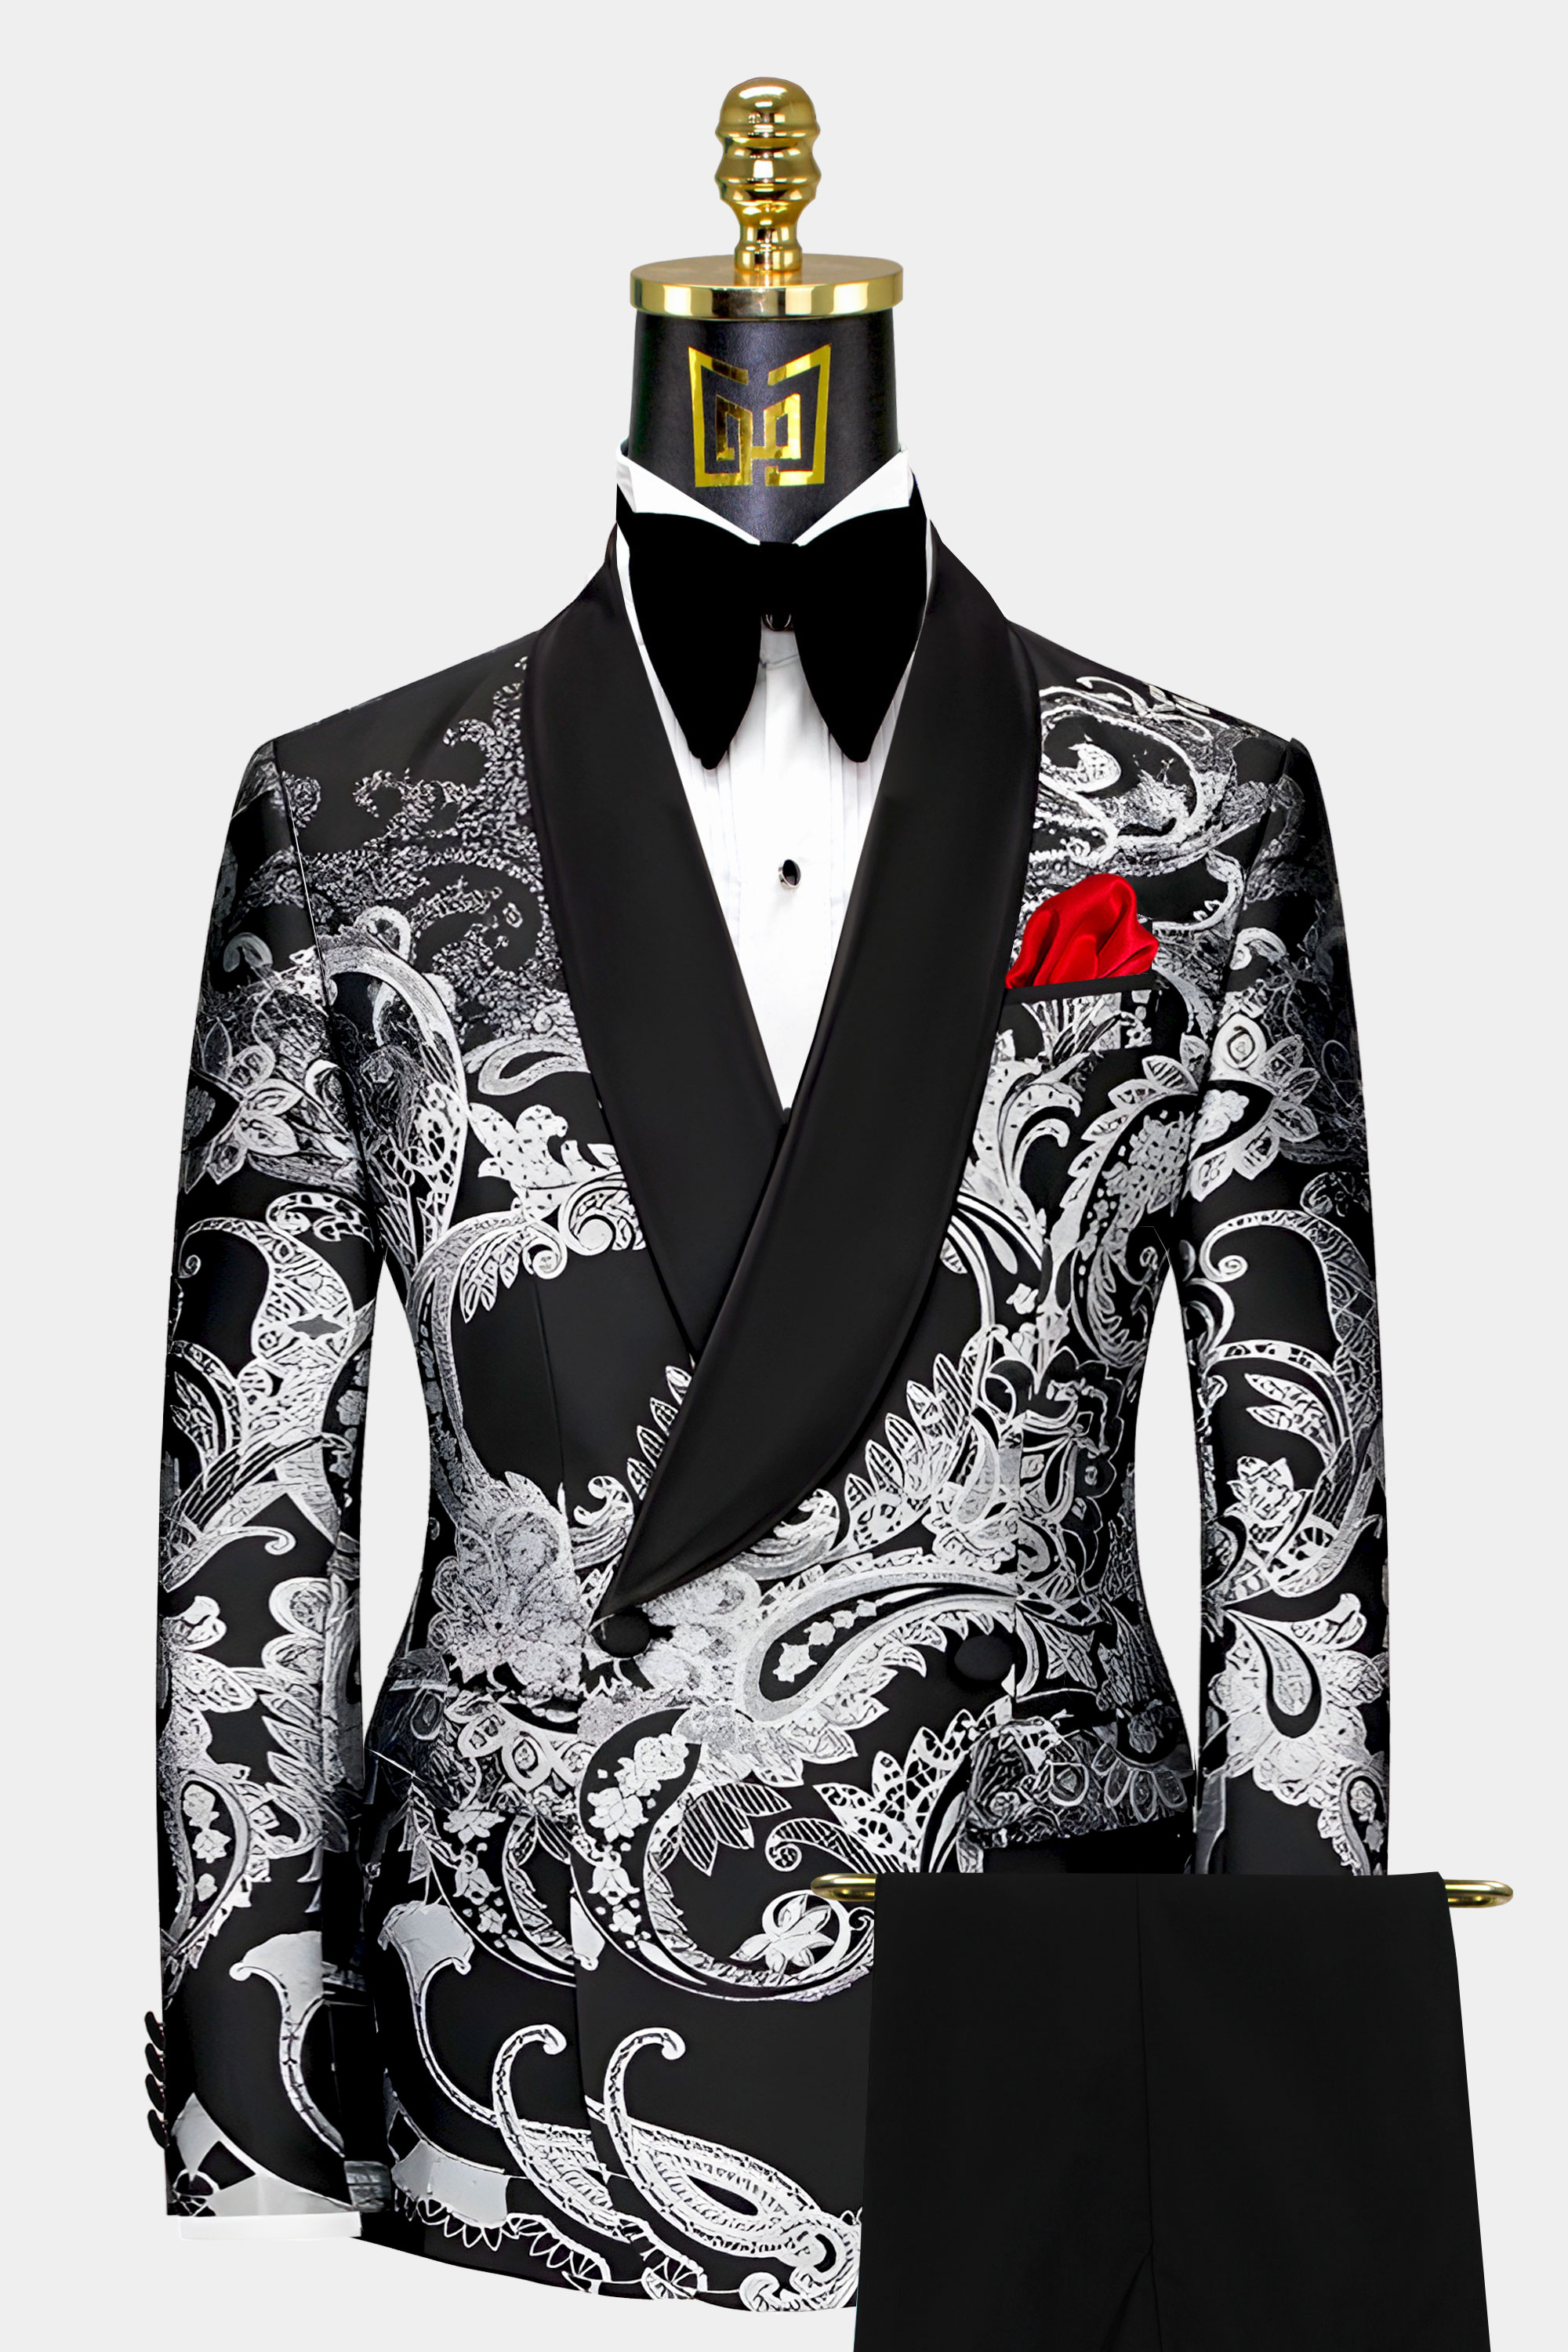 Double Breasted Black & Silver Paisley Tuxedo - 3 Piece